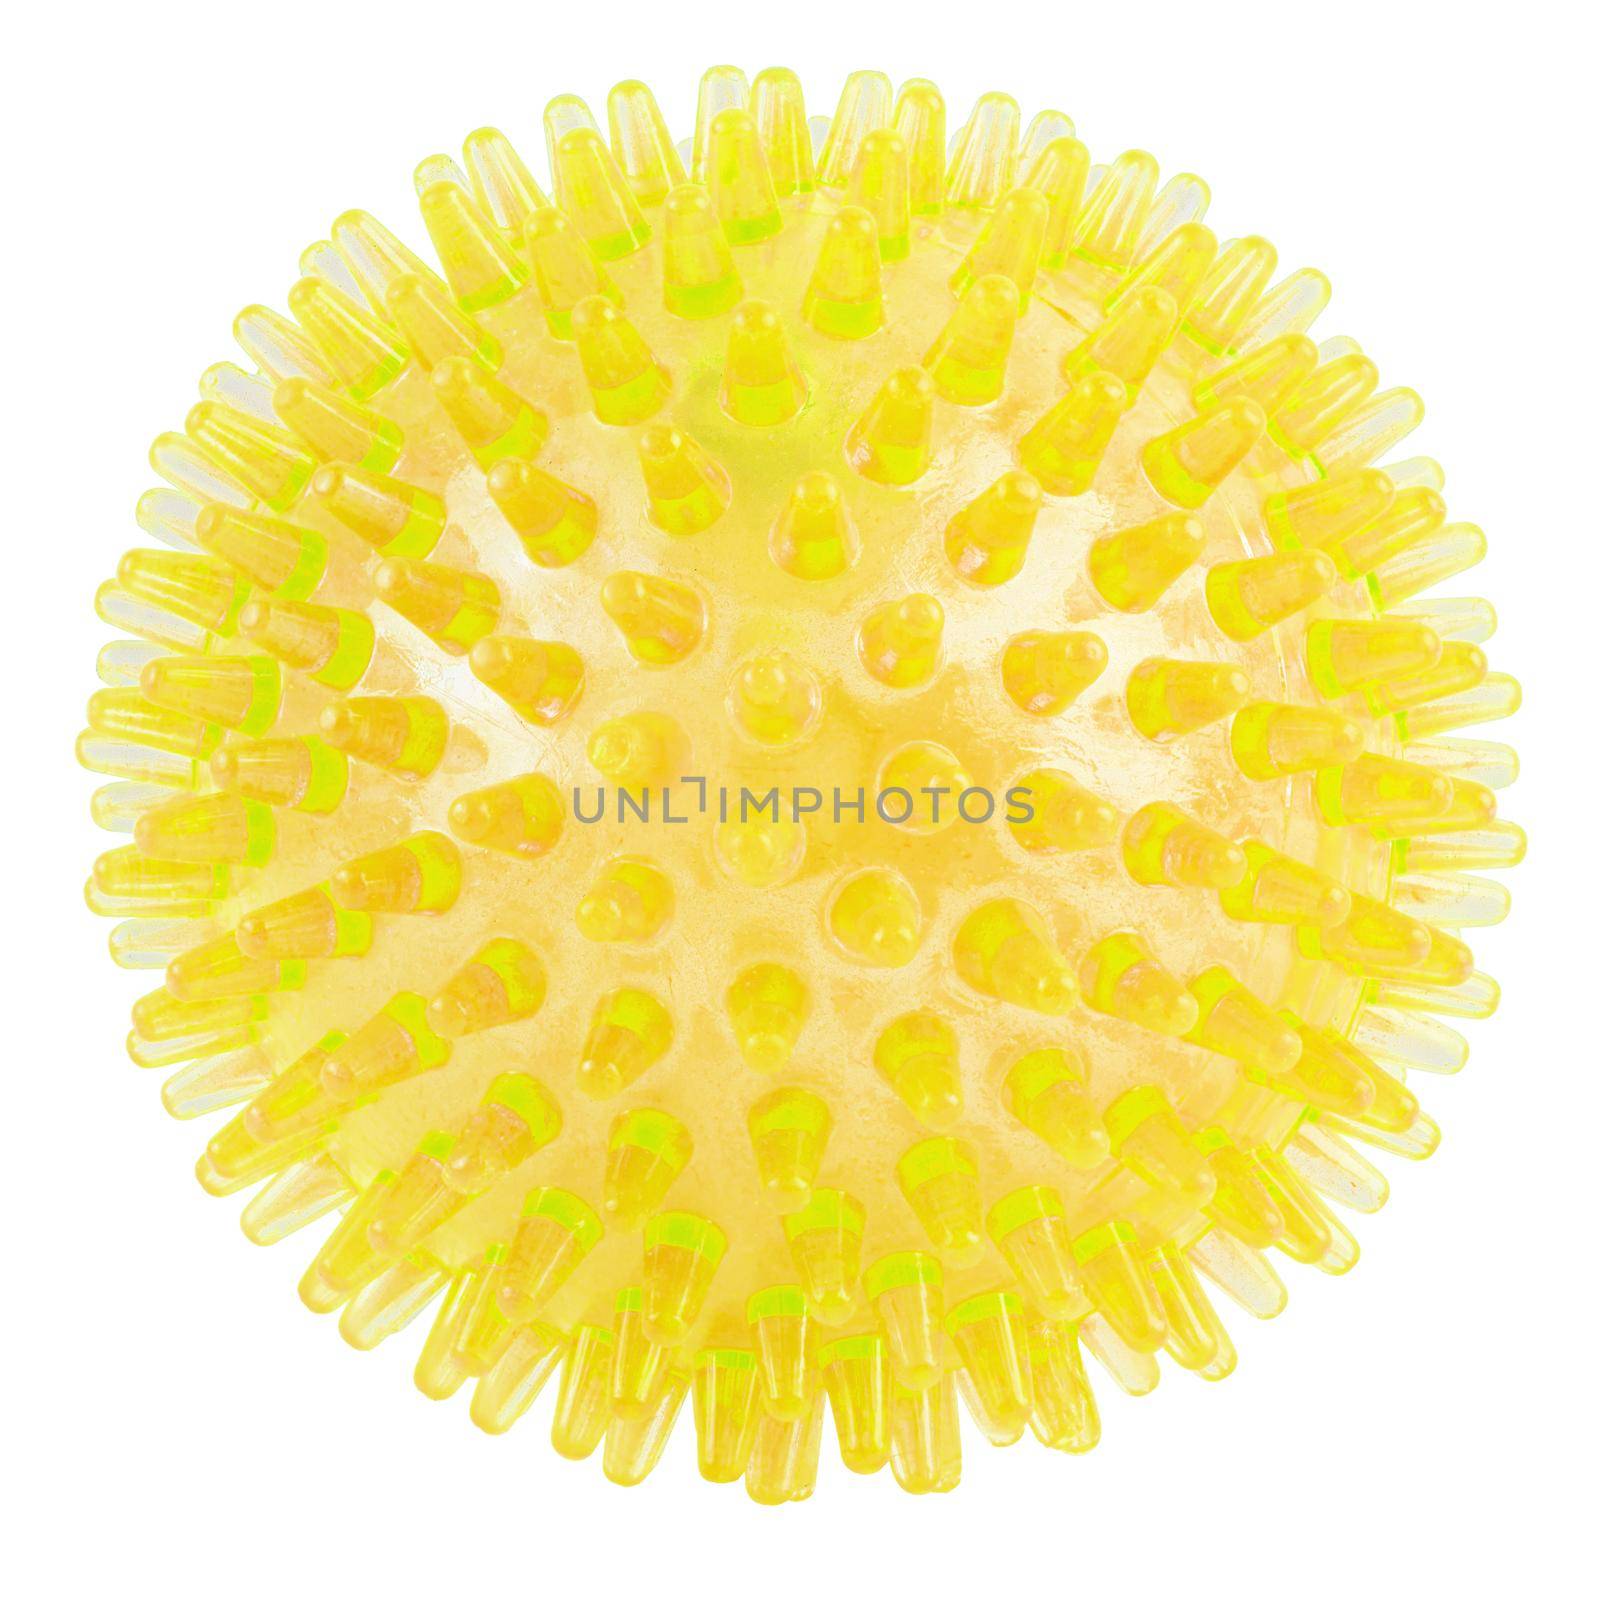 transparent yellow spiked plastic ball isolated on white background - massager, dog toy and COVID-19 symbol by z1b